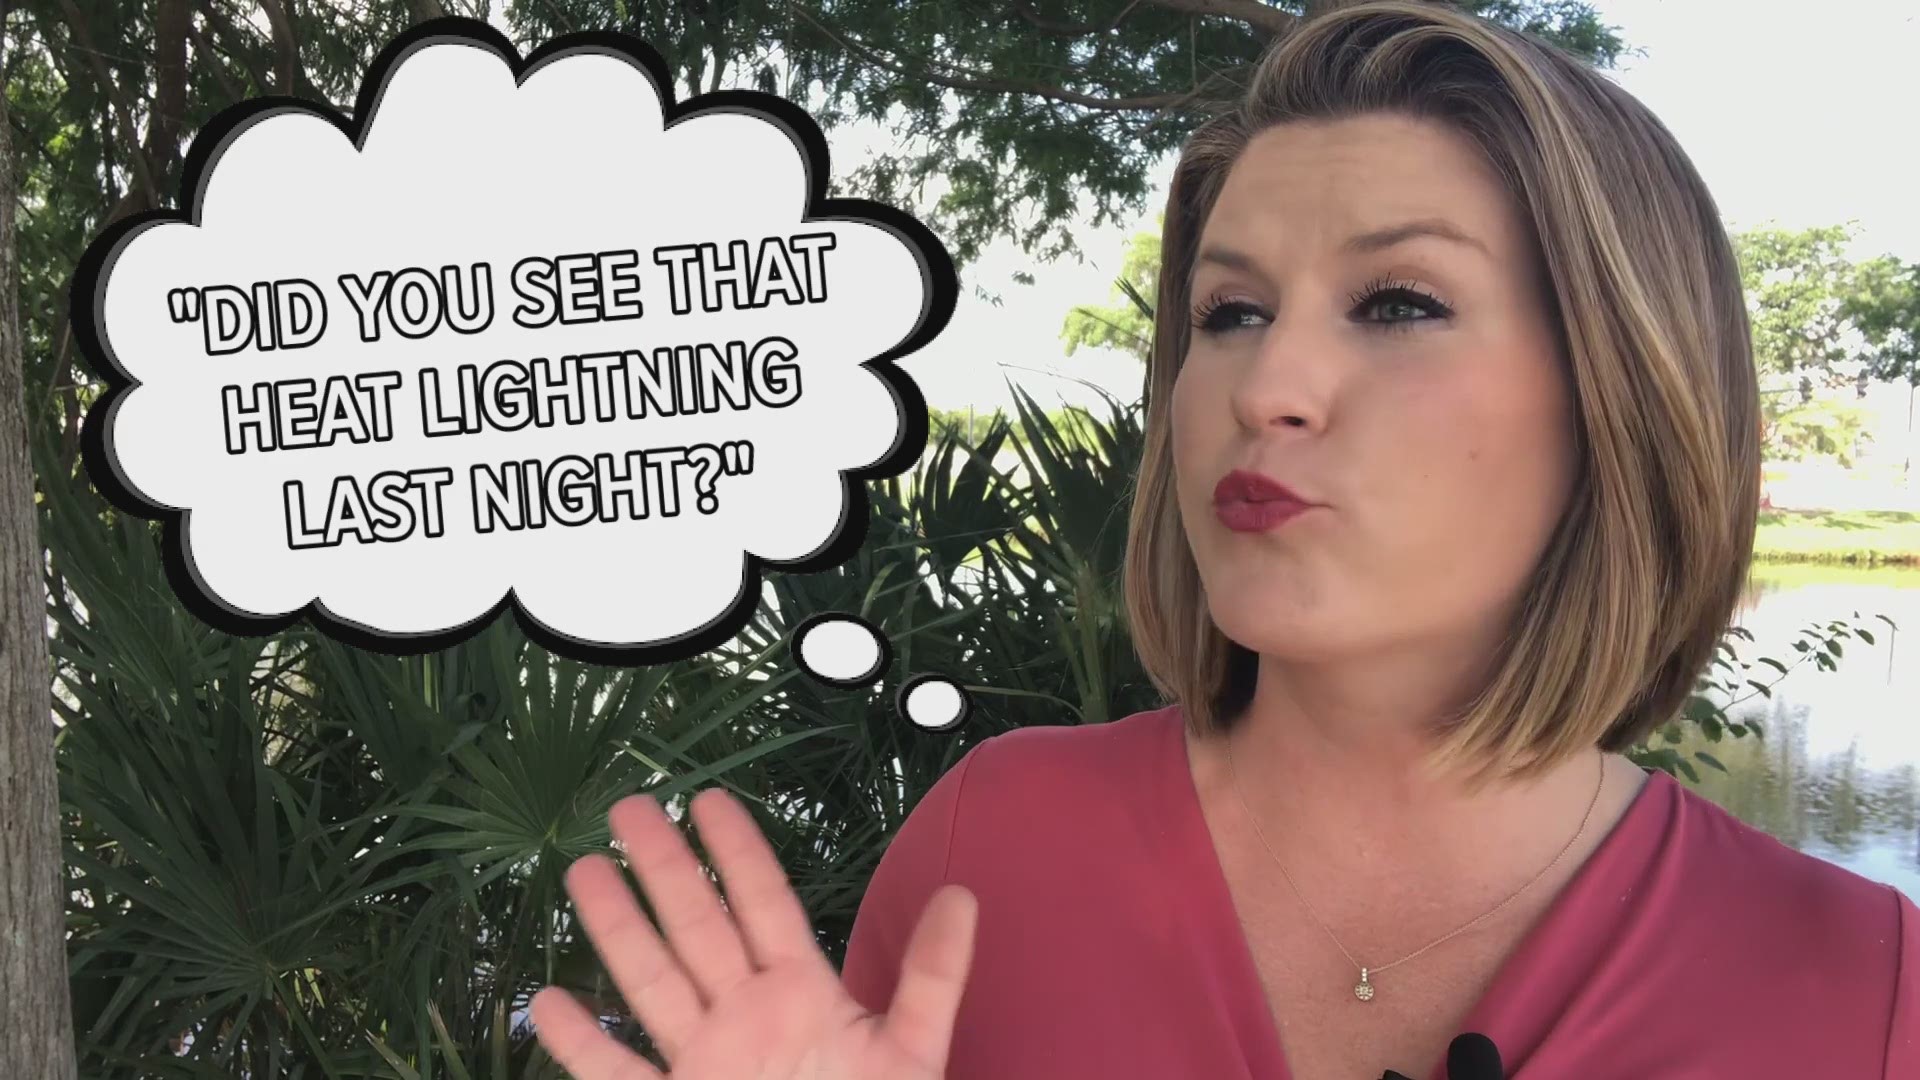 Heat lightning? Call it what you want, but you may be misusing the term!